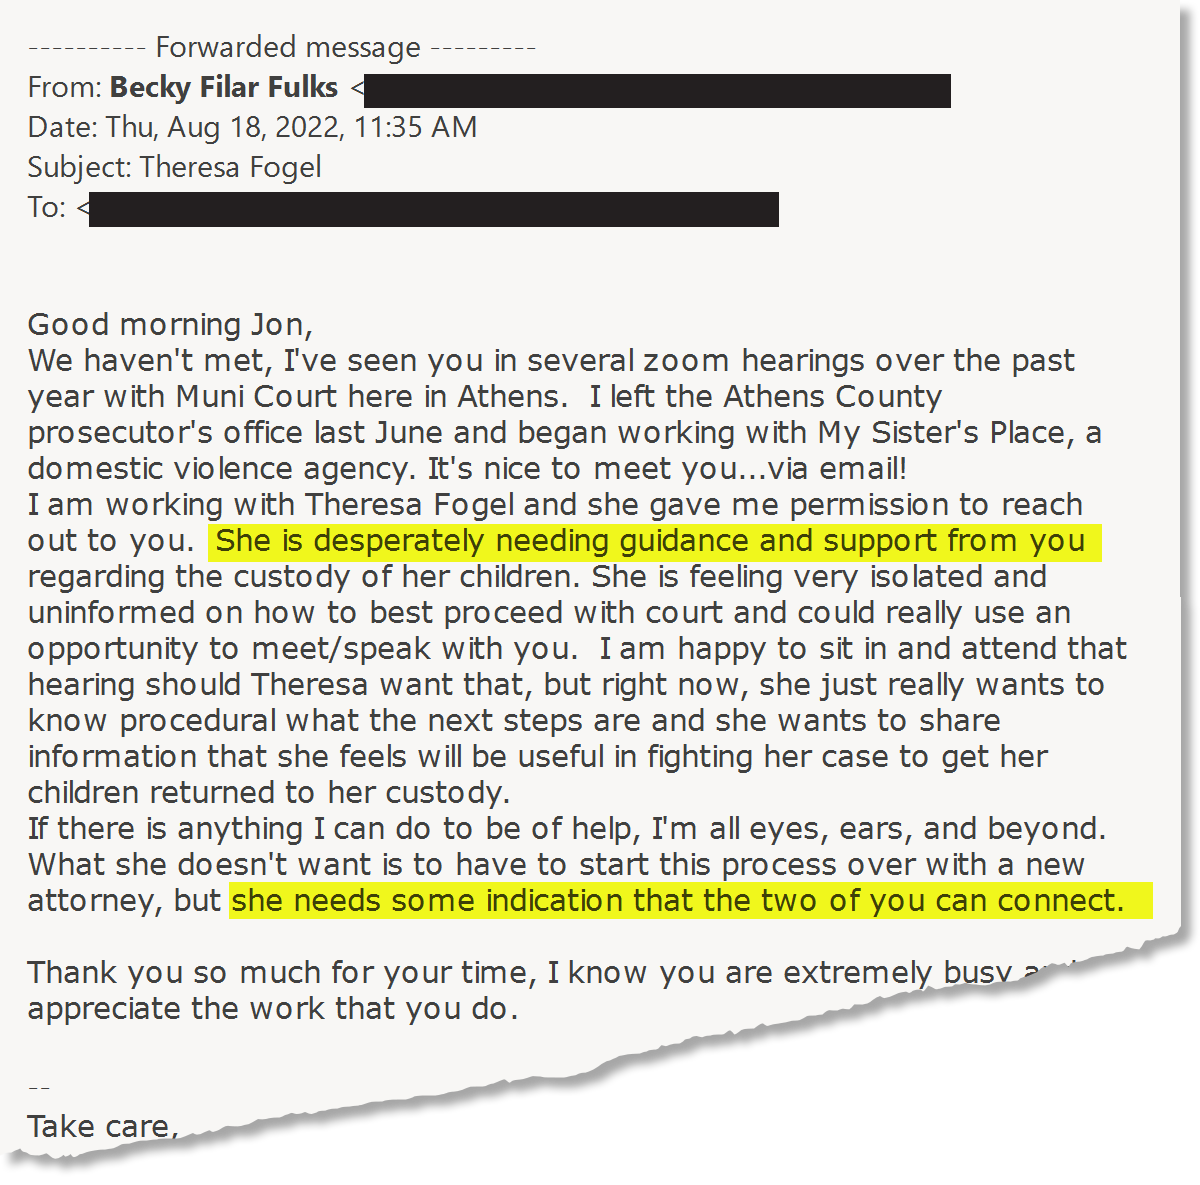 An email from Becky Fulks to defense attorney Jon Getson